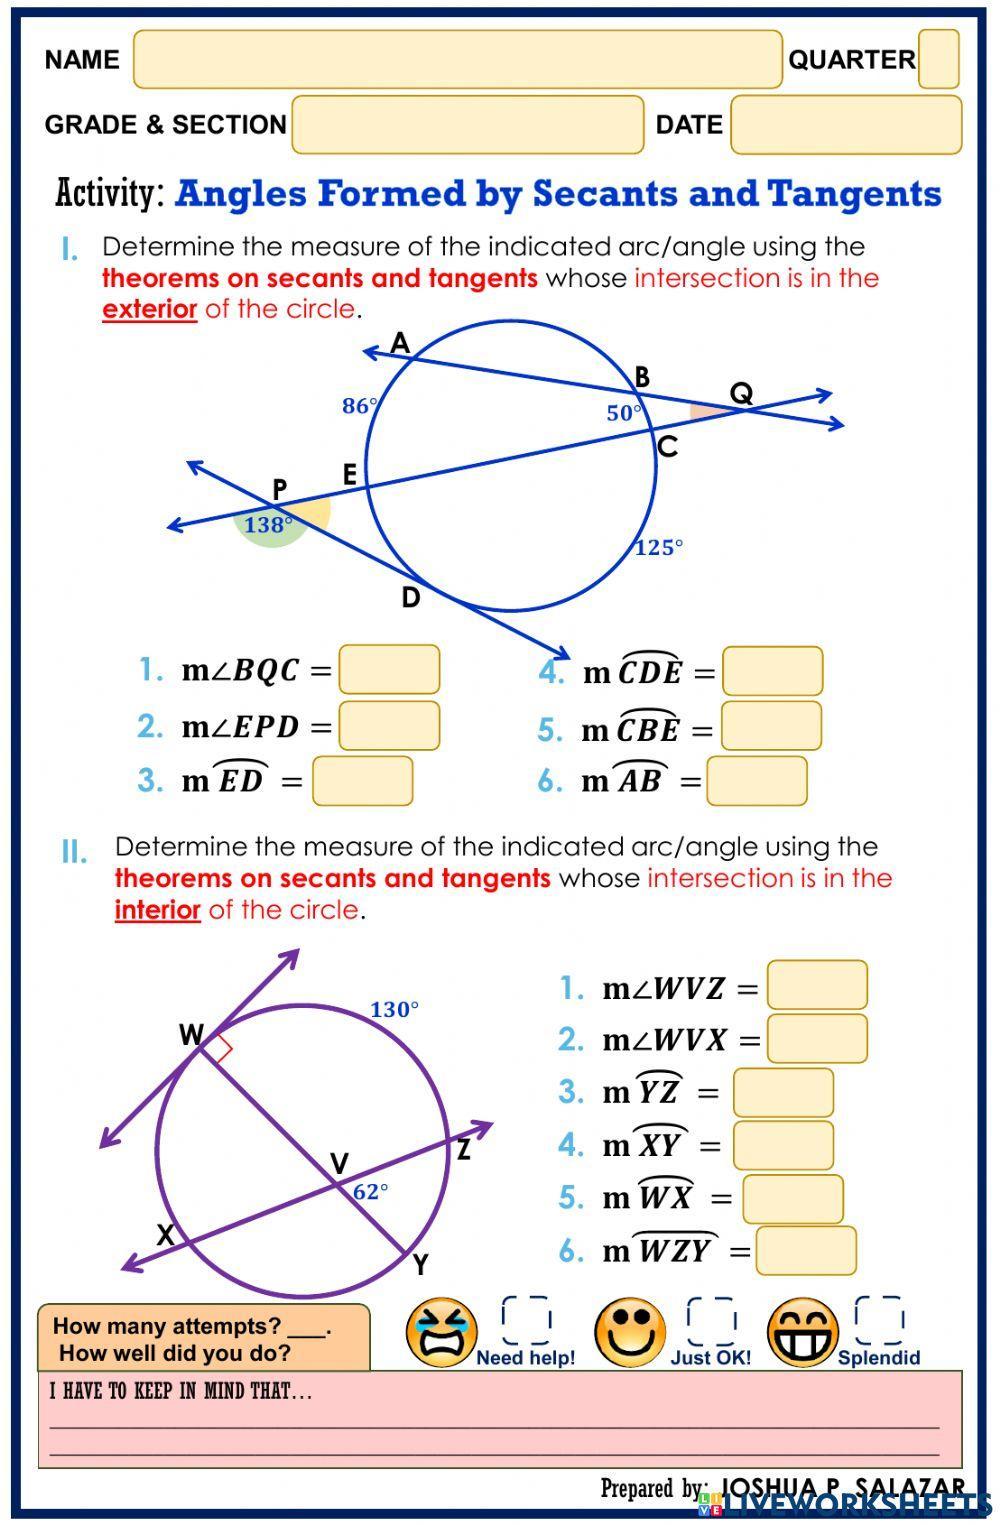 Angles formed by Secants and Tangents